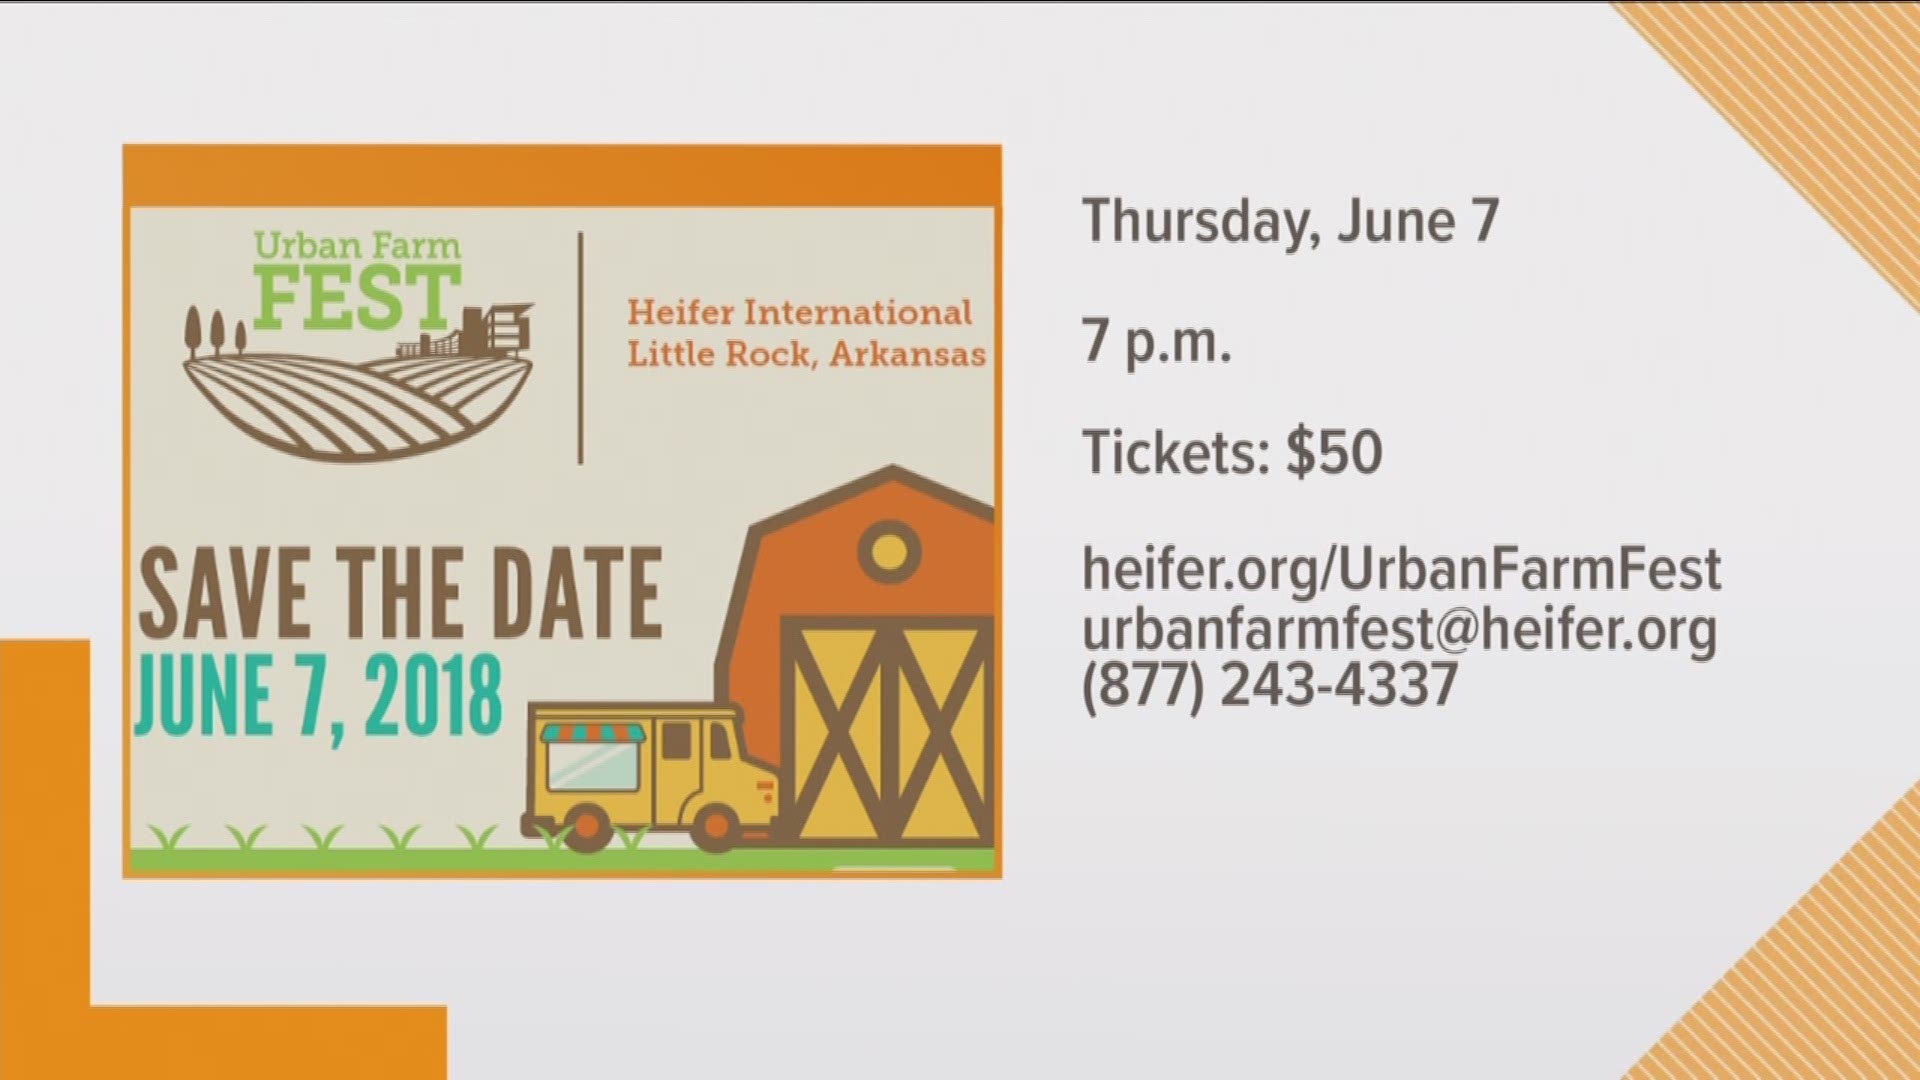 At 7 p.m., June 7, you can join Heifer International for the Heifer Urban Farm Fest. There will be drinks created with ingredients from the Heifer Urban Farm. Proceeds support Arkansas farming communities through Heifer USA.